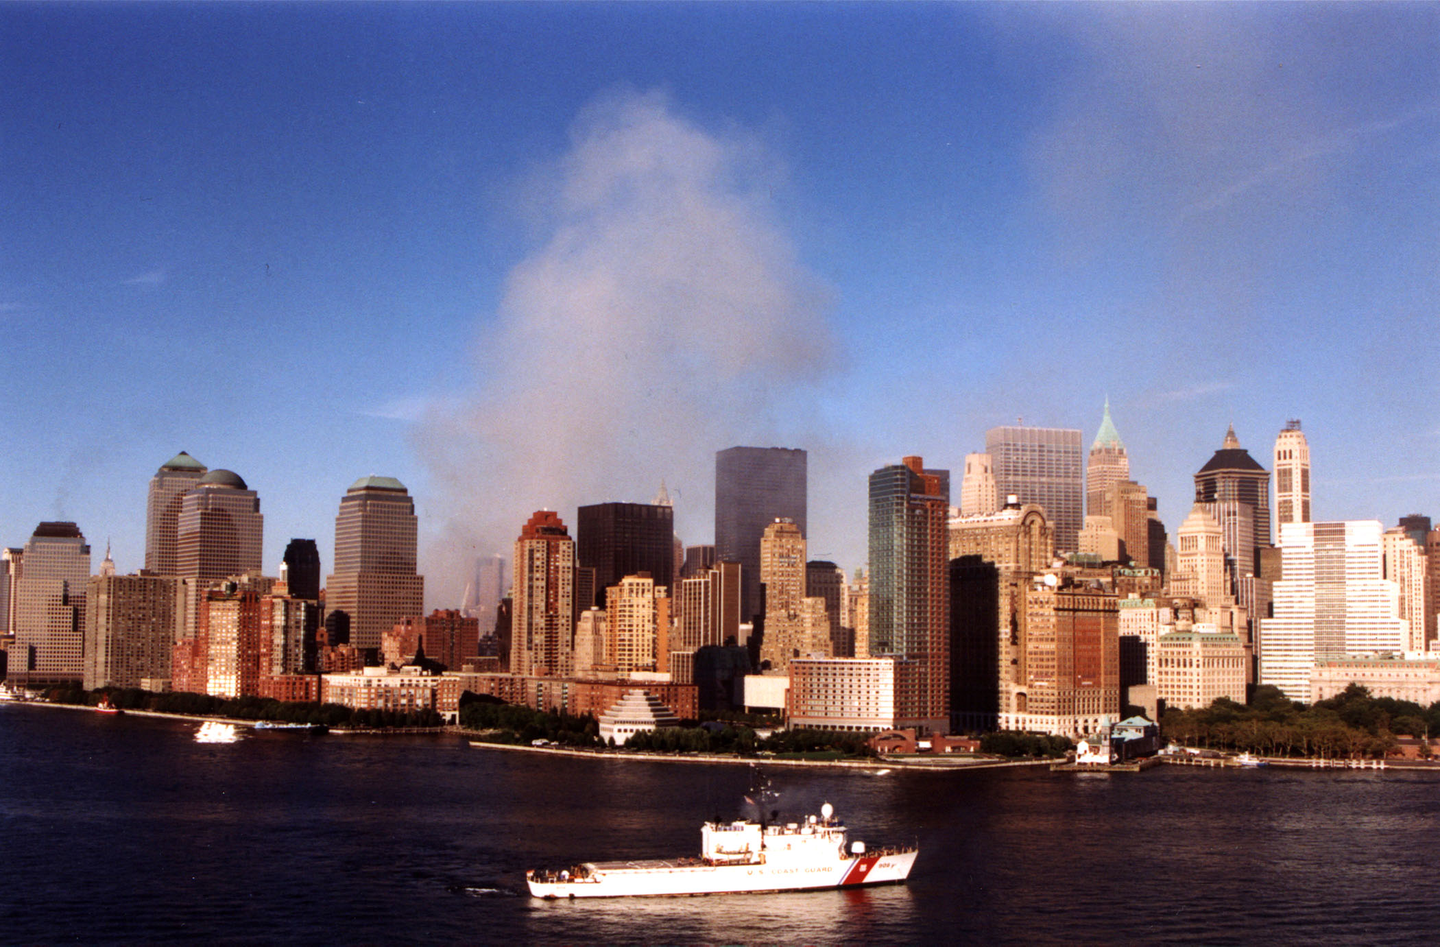 Cutter Tahoma deployed to New York Harbor on Sept. 11, 2001, and smoke emanating from the remains of the World Trade Towers.